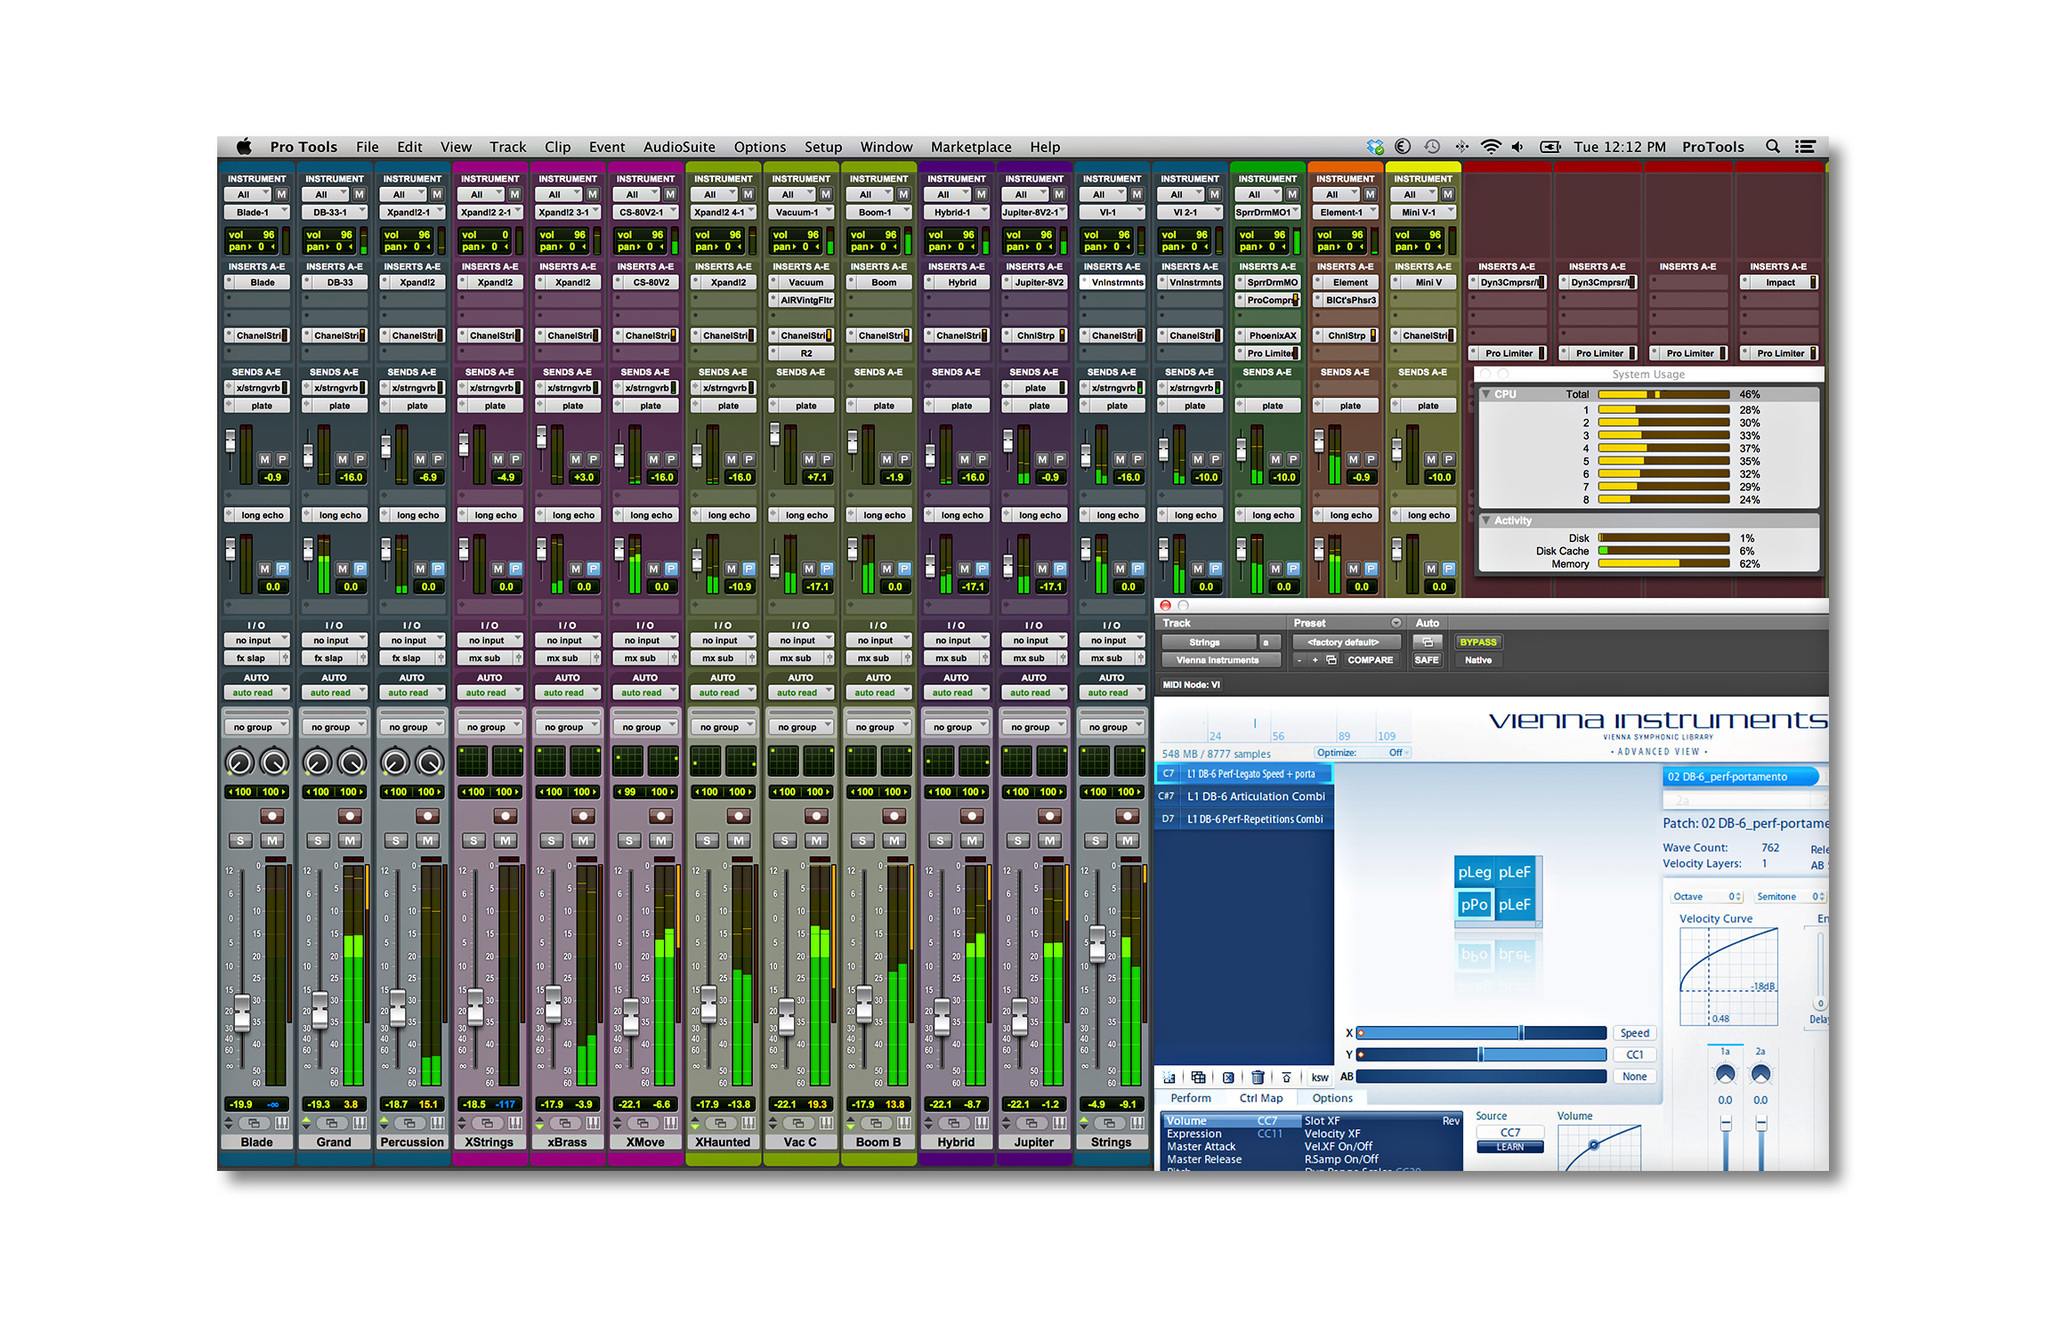 pro tools 12 for mac free